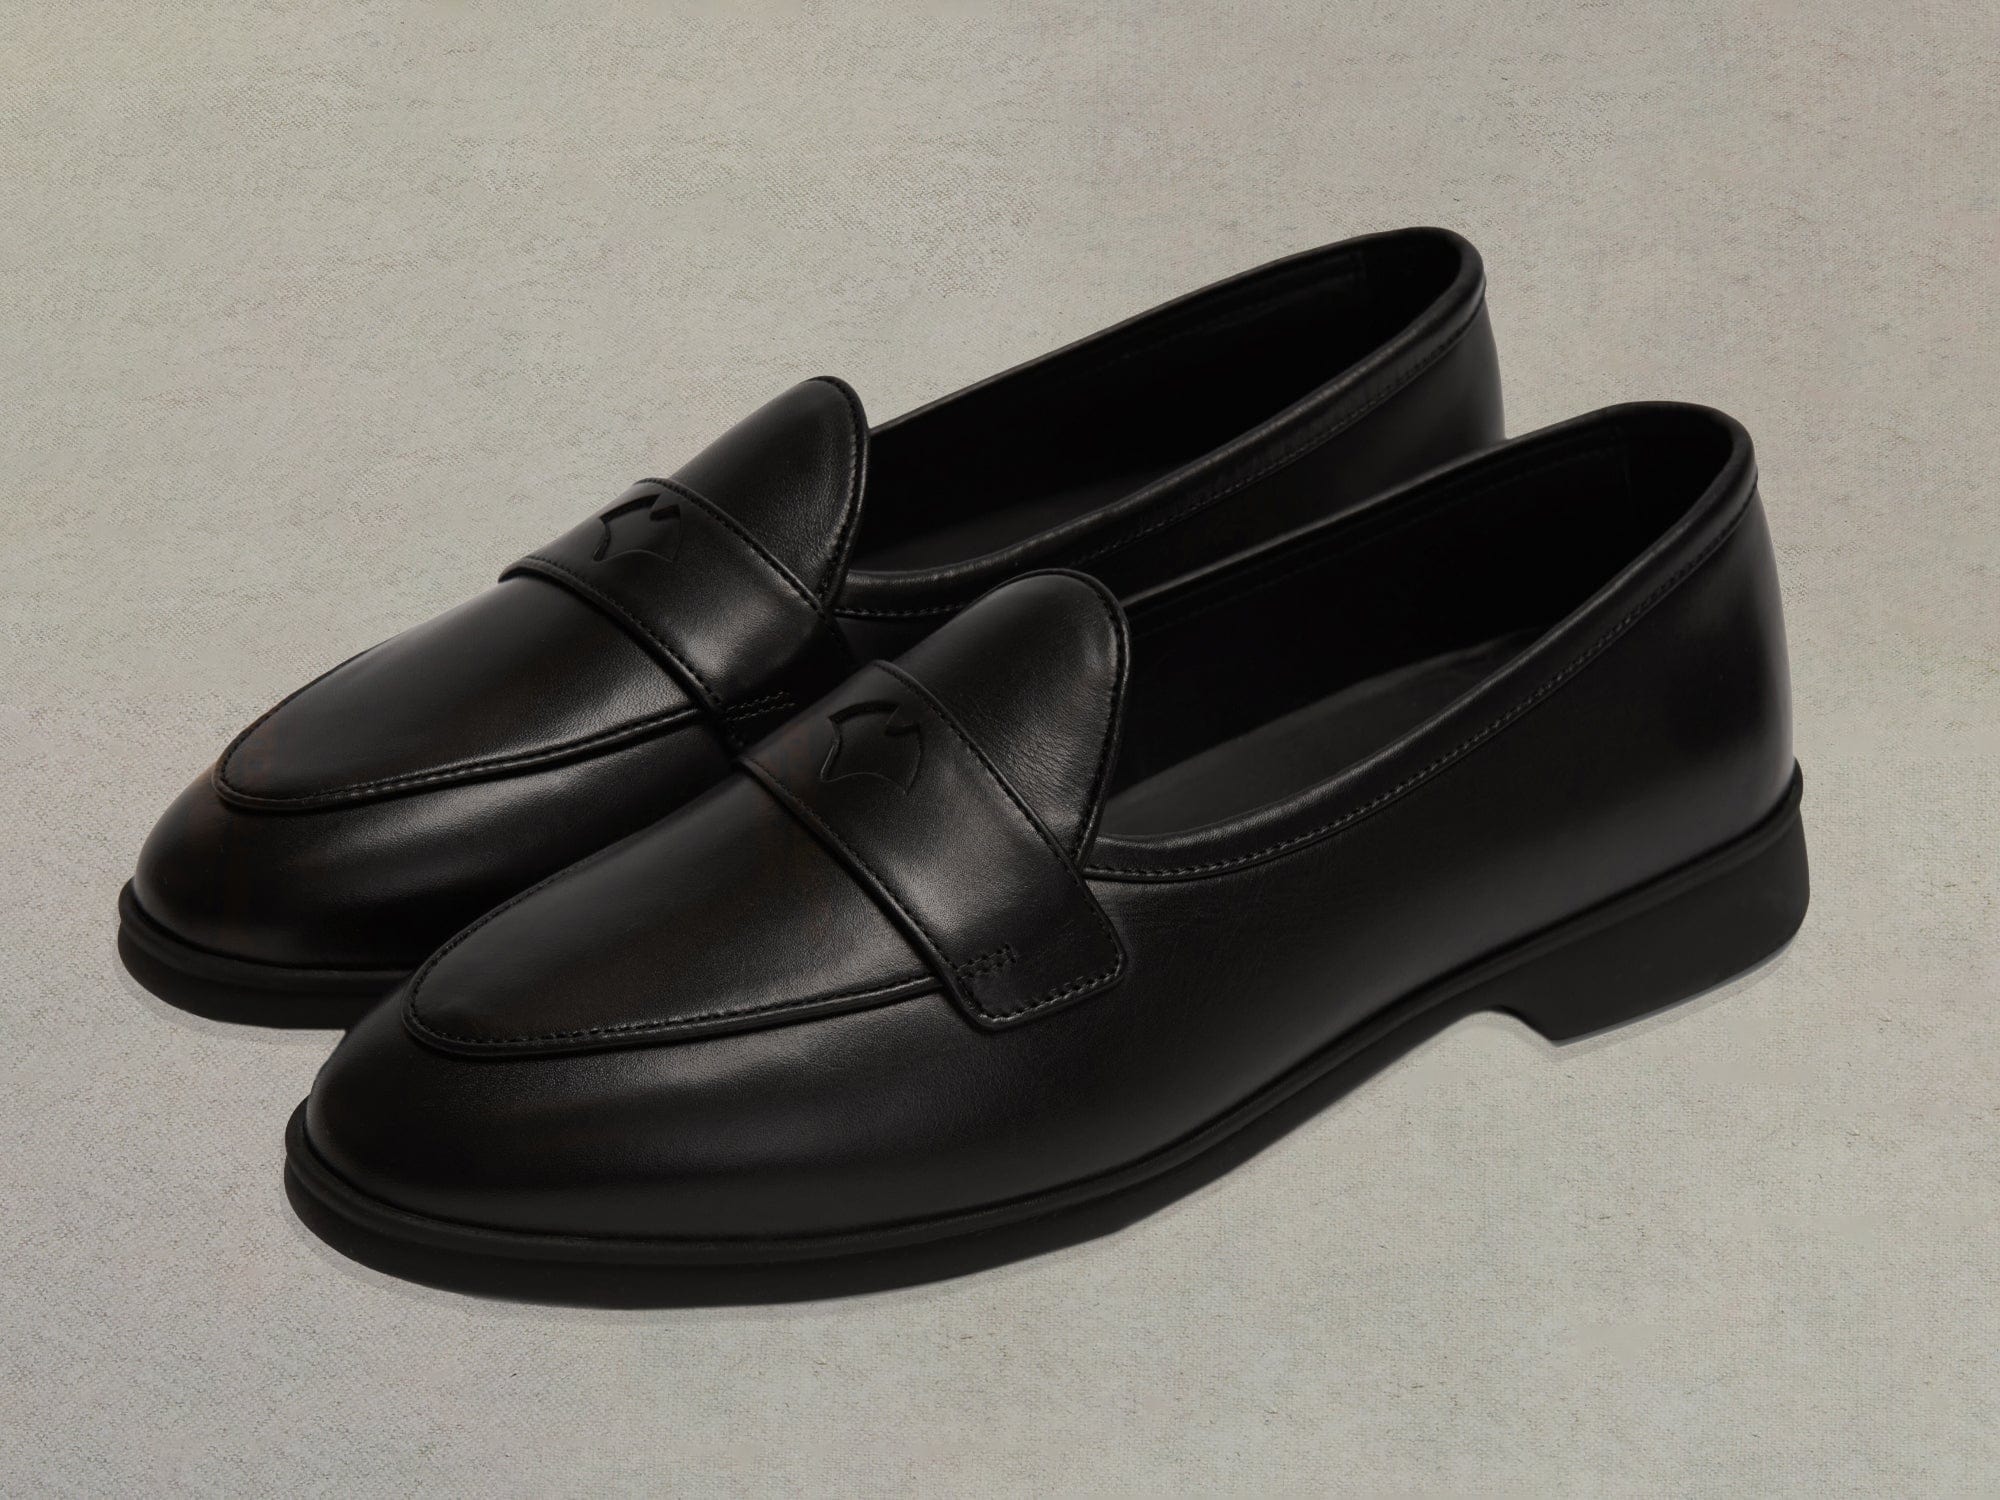 Stride Penny Loafers in Black Milled Calf